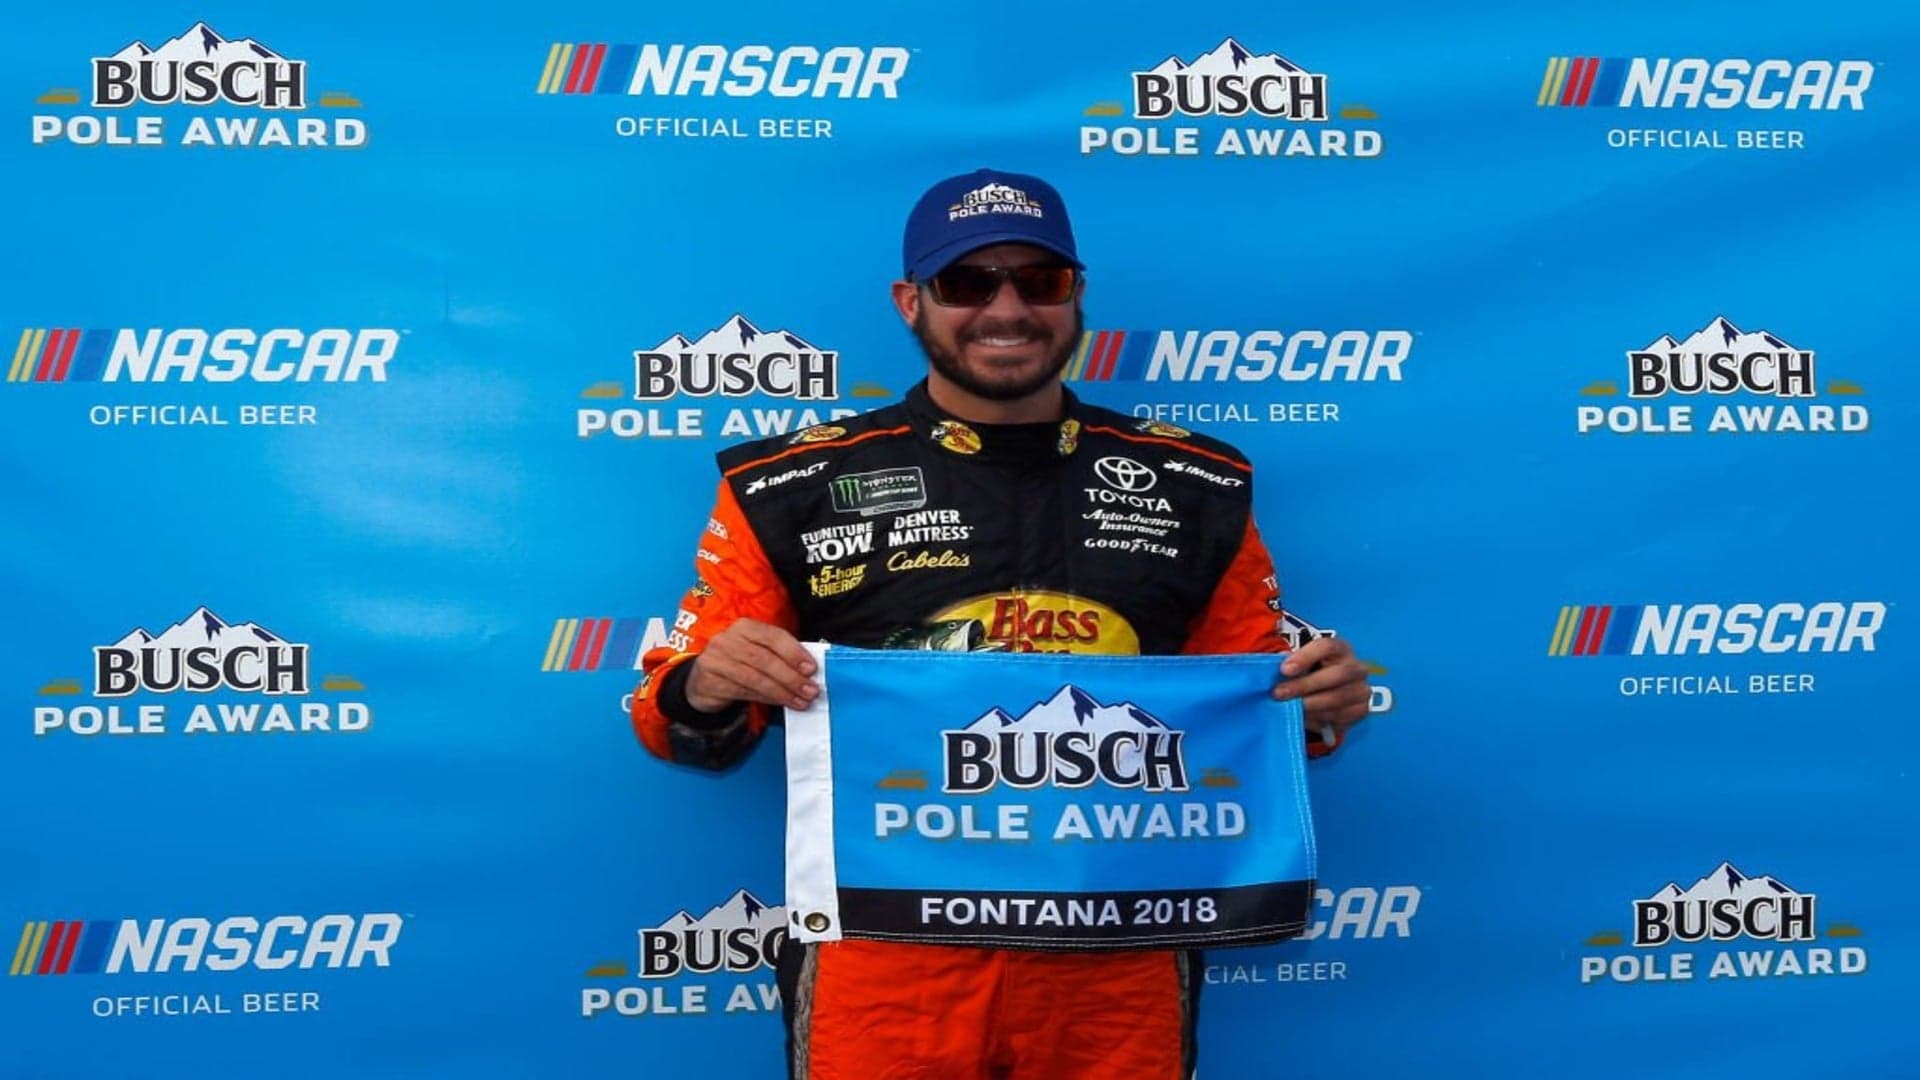 While Martin Truex Jr. Gets Pole at Auto Club Speedway, 13 NASCAR Drivers Fail Inspection